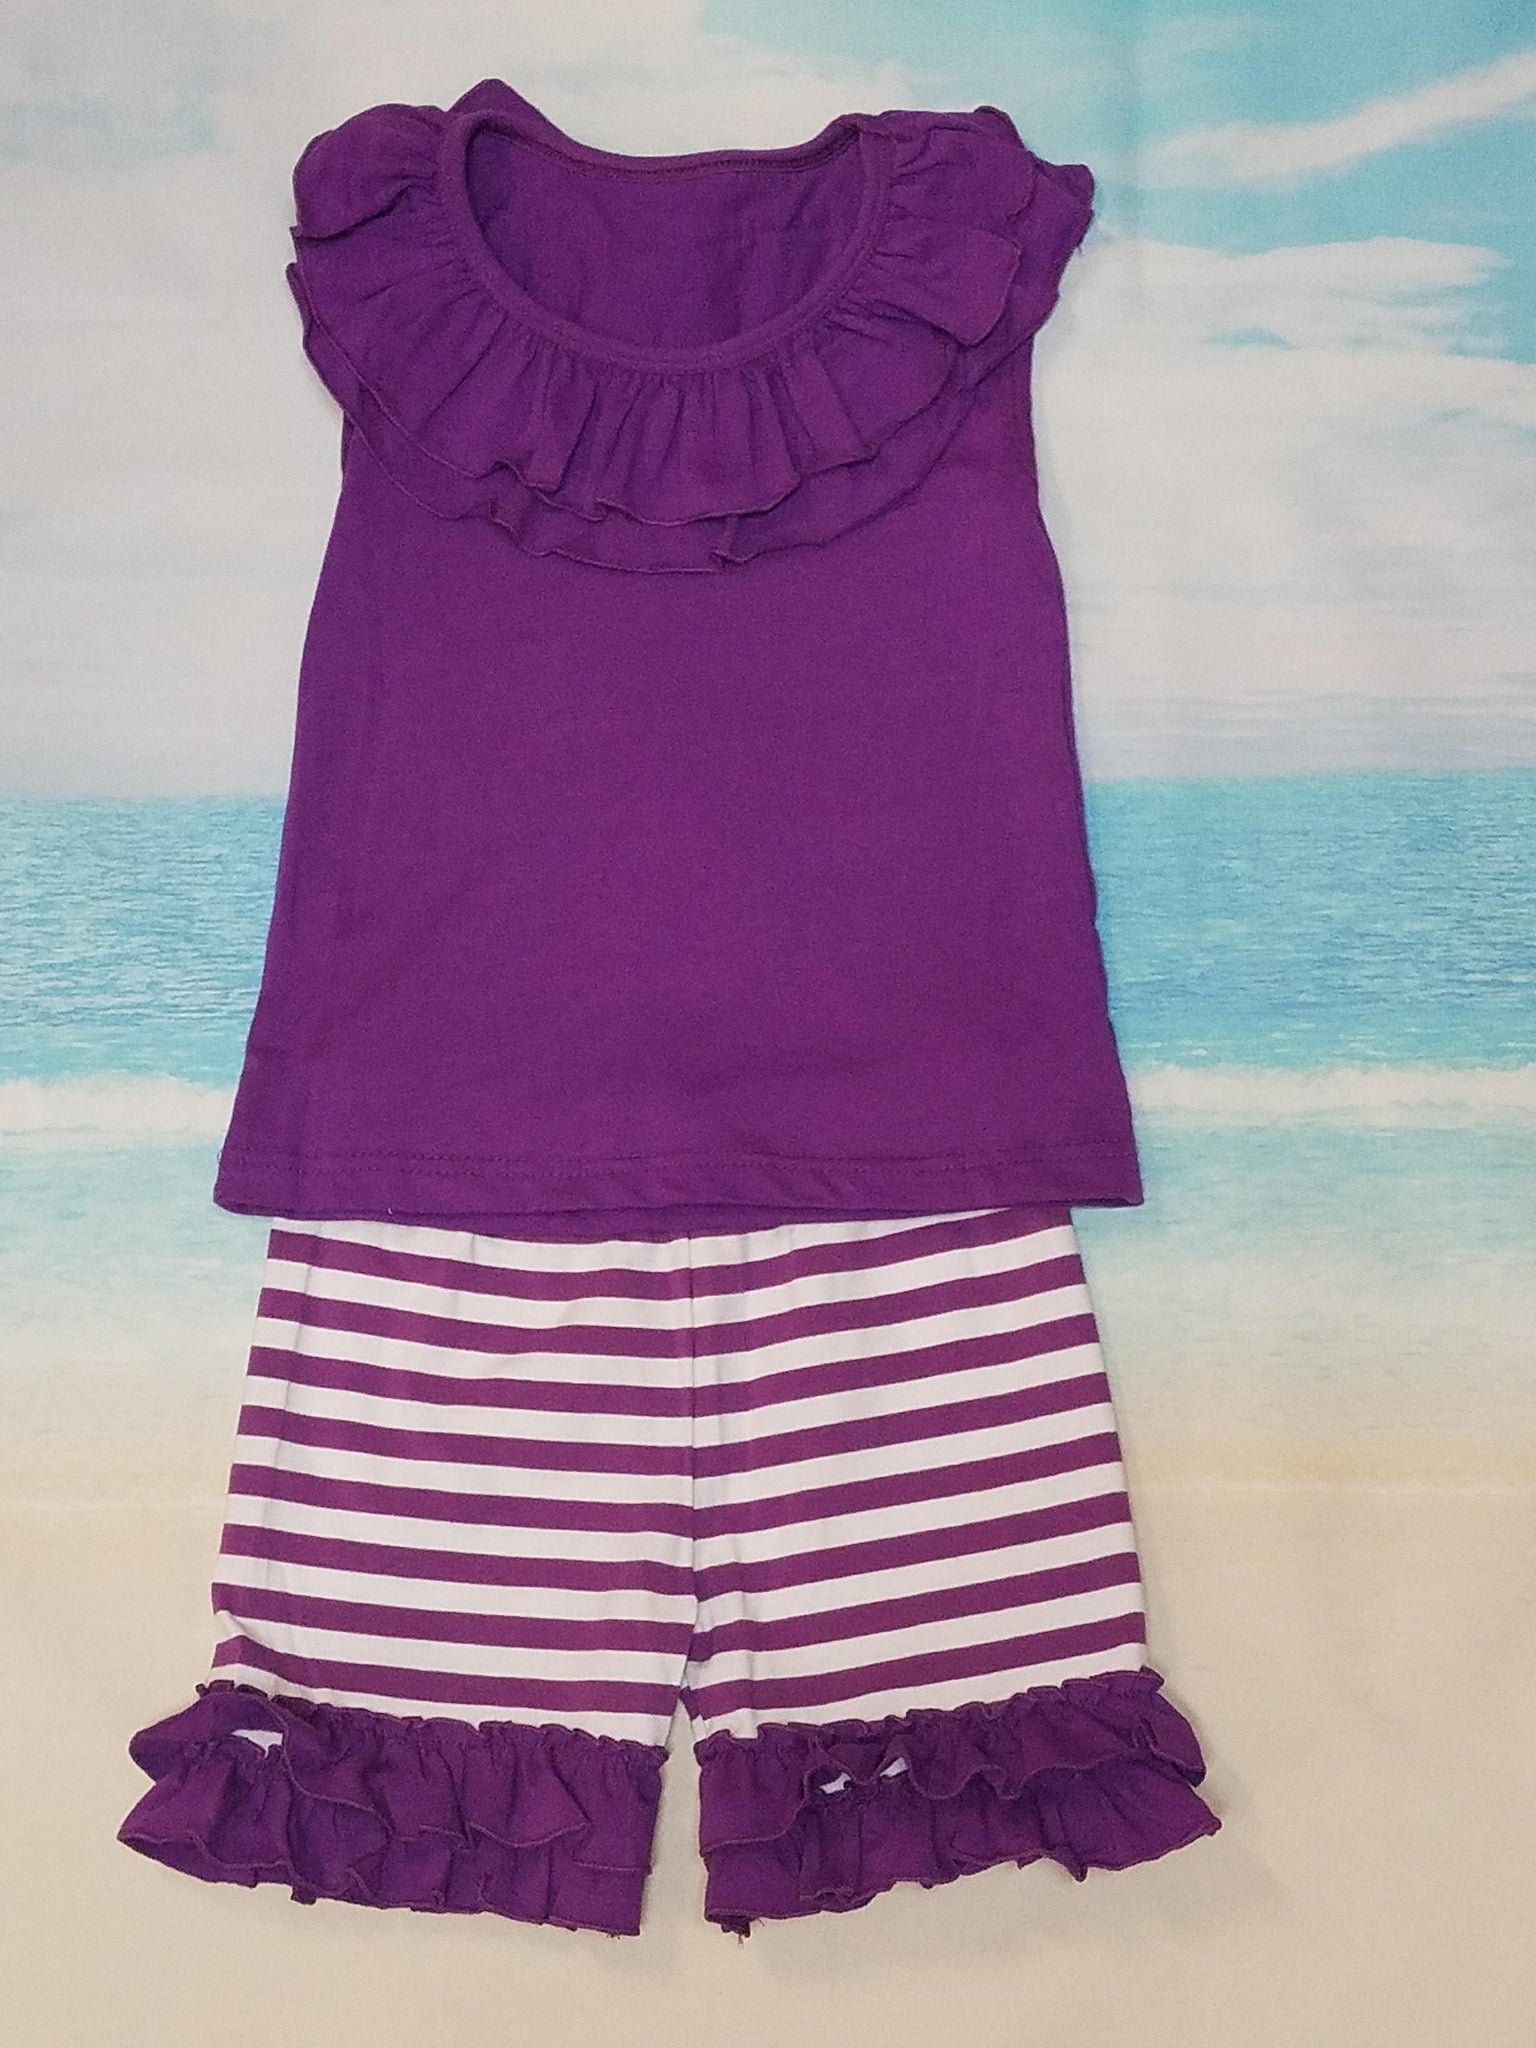 Purple Ruffle Set - Momma G's Children's Boutique, Screen Printing, Embroidery & More